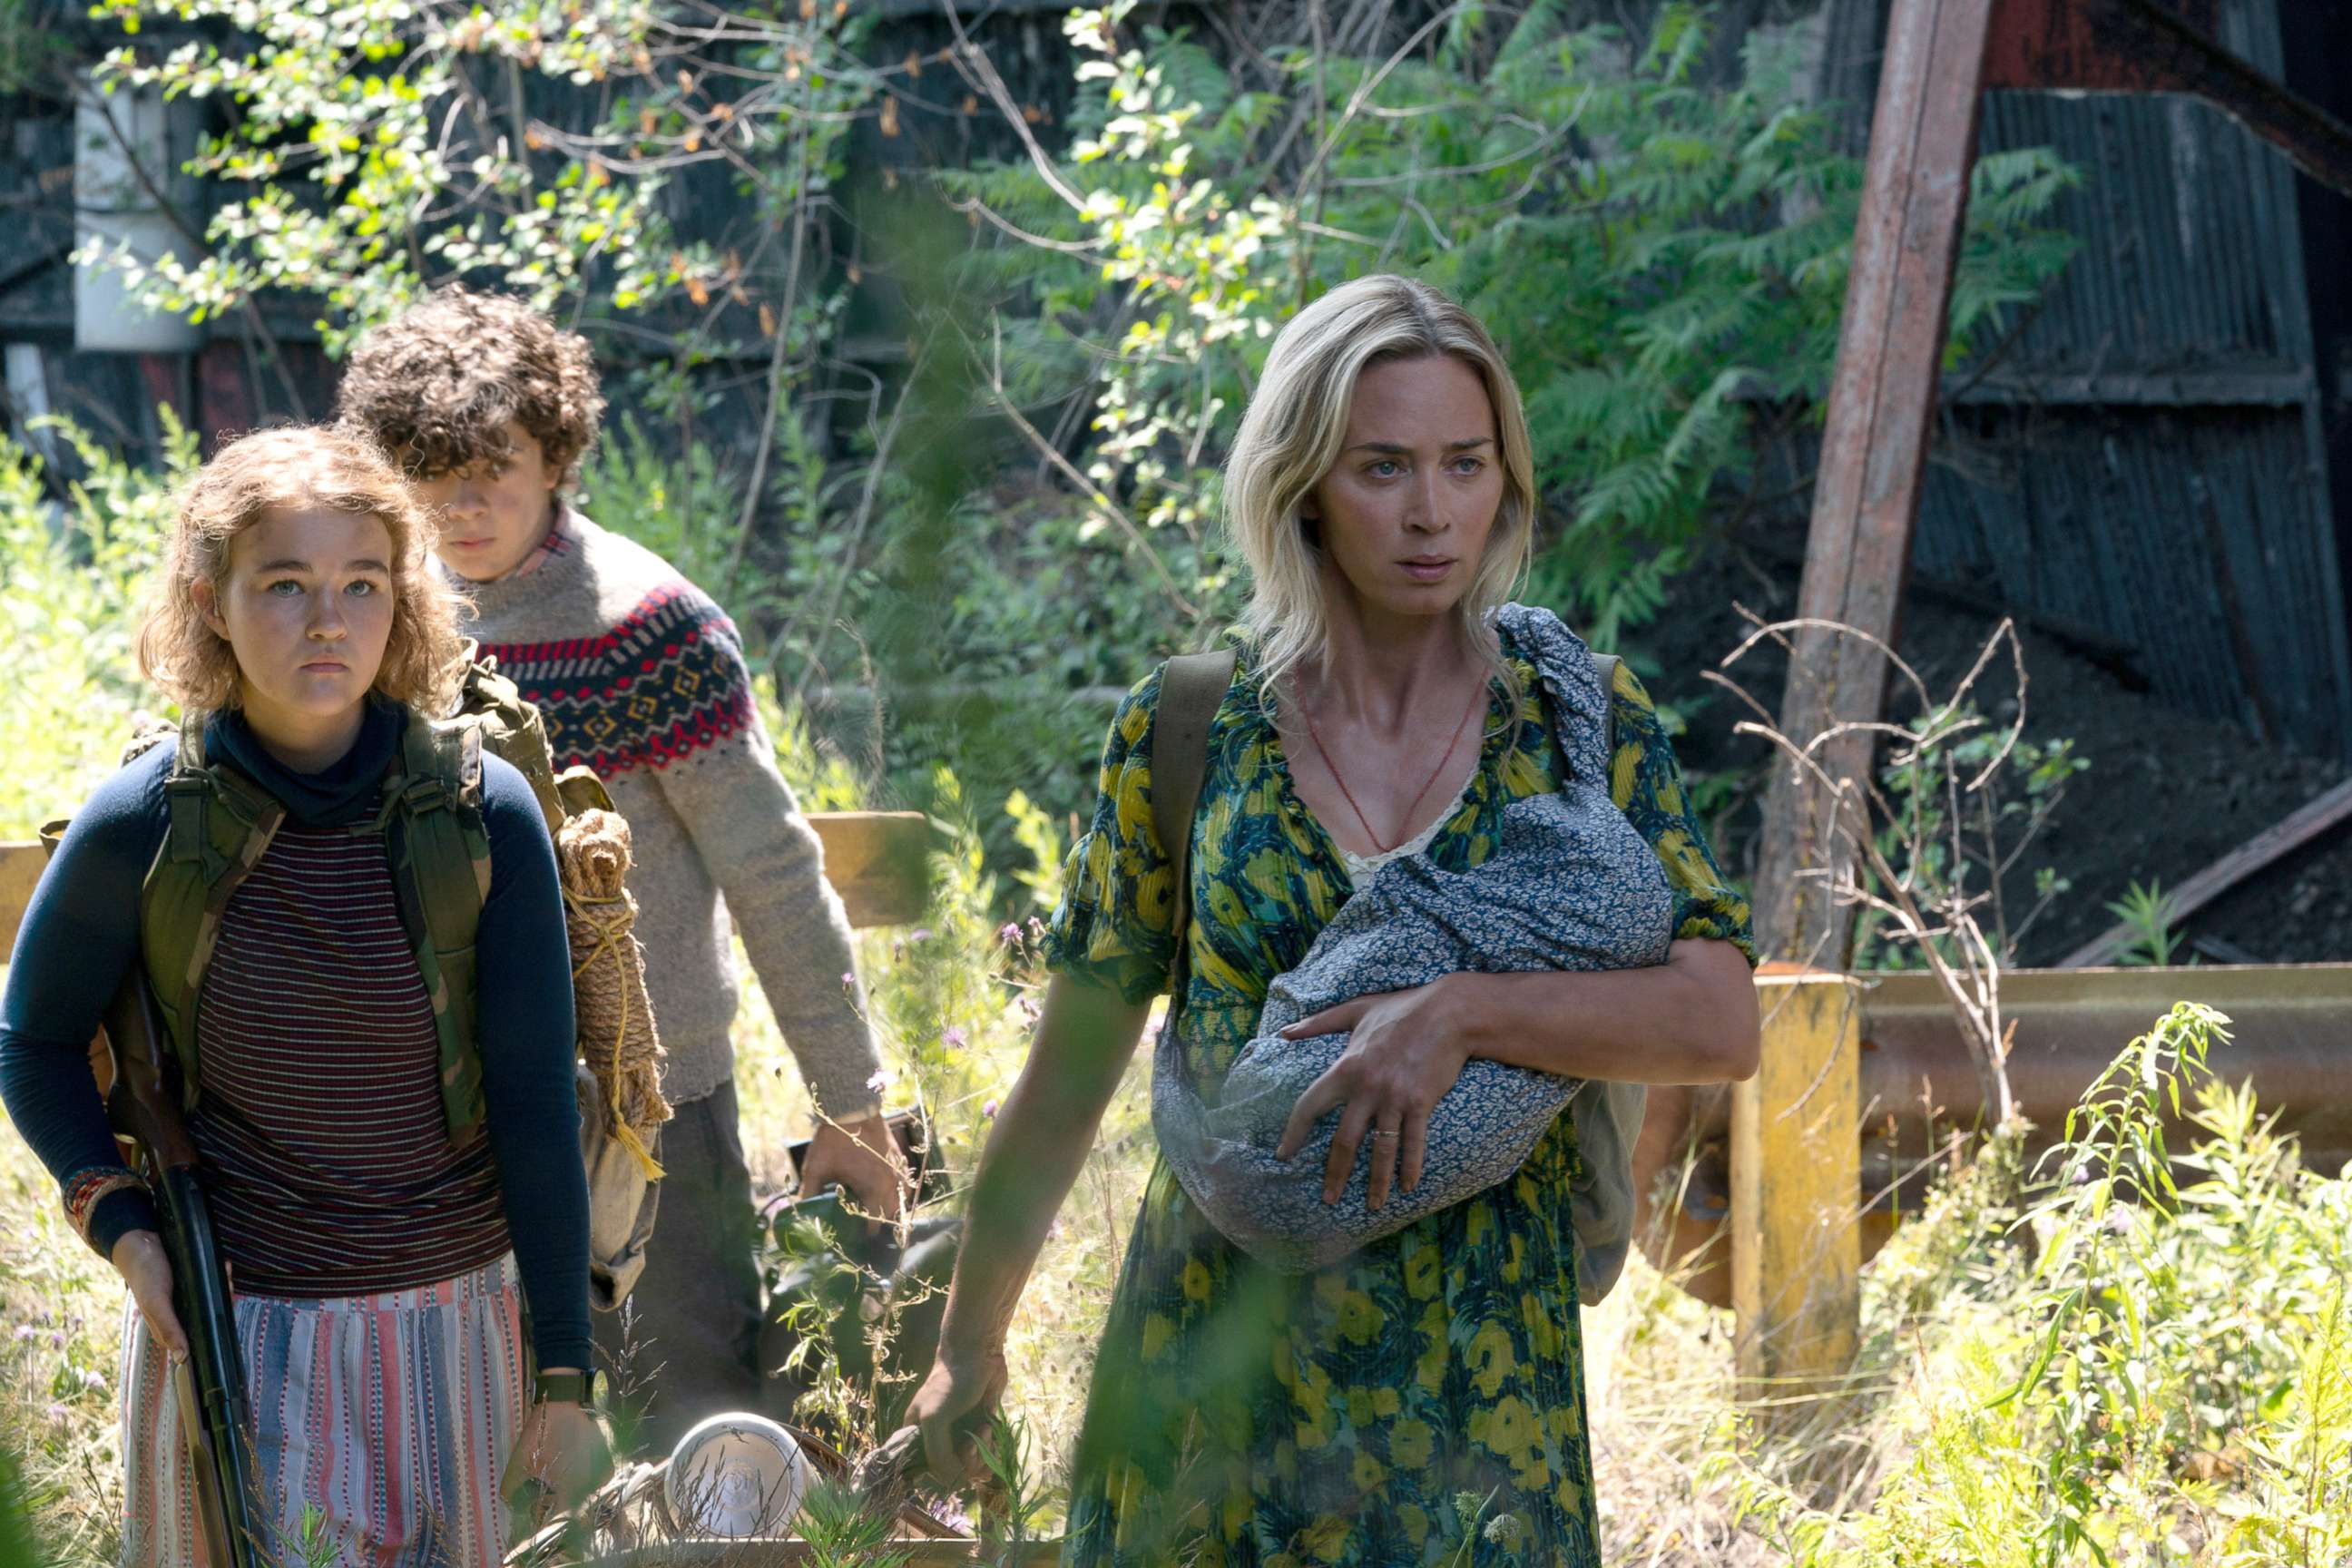 PHOTO: Regan (Millicent Simmonds), Marcus (Noah Jupe) and Evelyn (Emily Blunt) brave the unknown in "A Quiet Place Part II,” from Paramount Pictures.